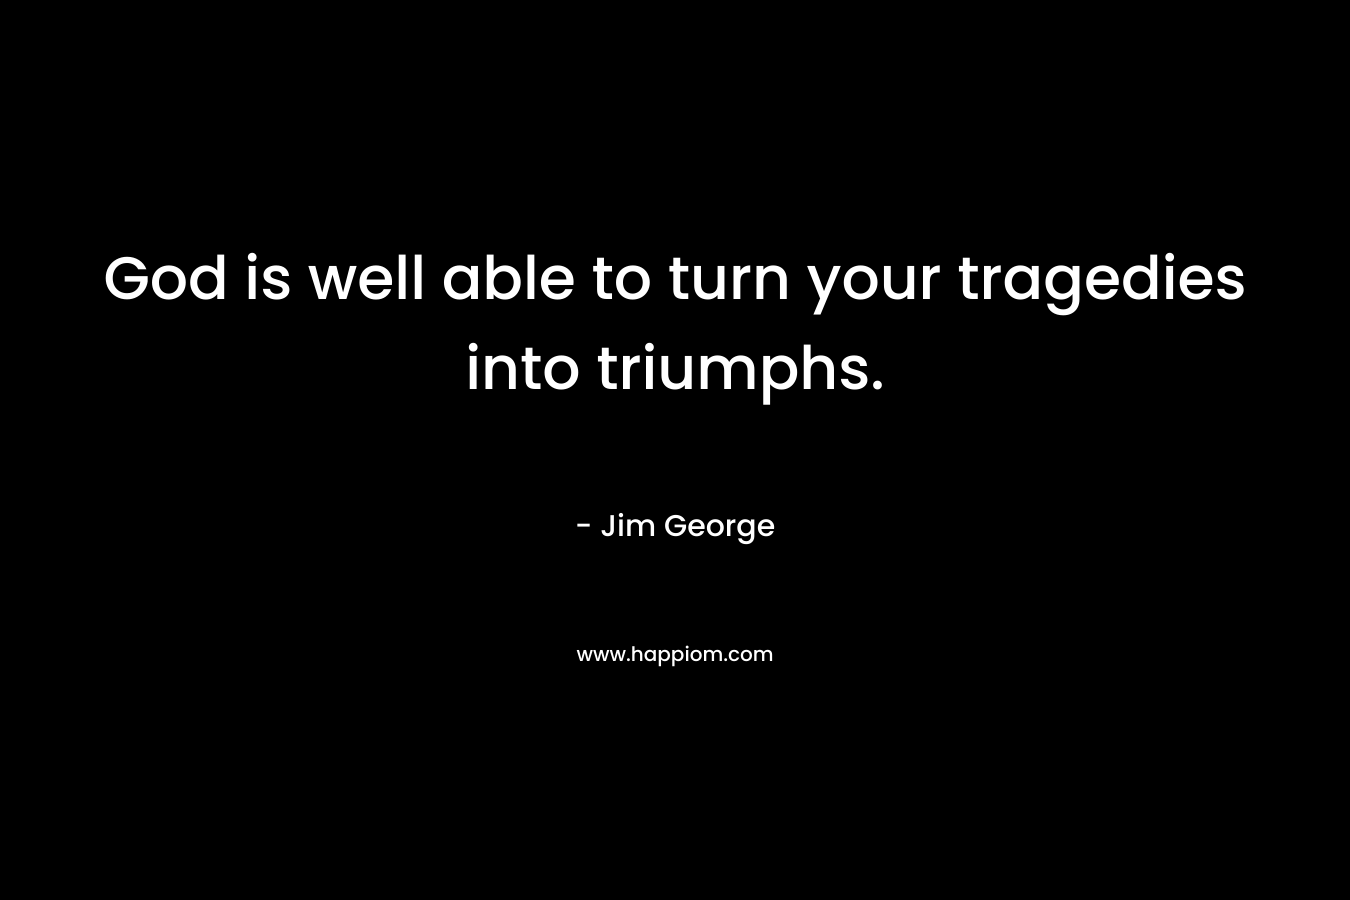 God is well able to turn your tragedies into triumphs.